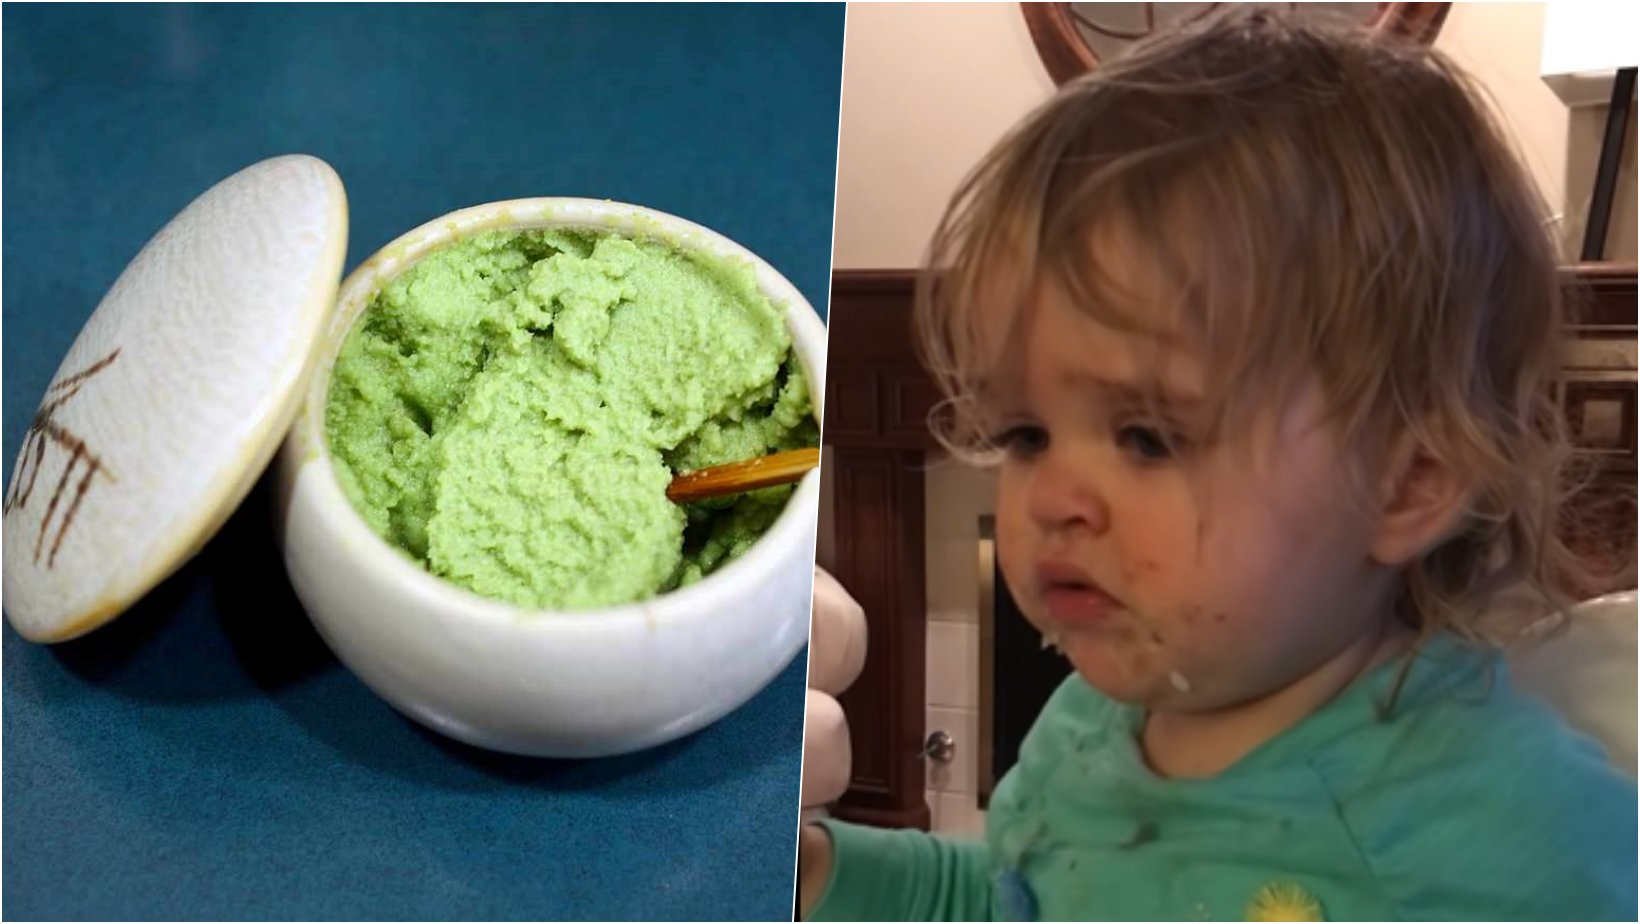 6 facebook cover 2.png?resize=1200,630 - A Mother Is Being Accused Of Child Abuse After Feeding Her Kid With Wasabi